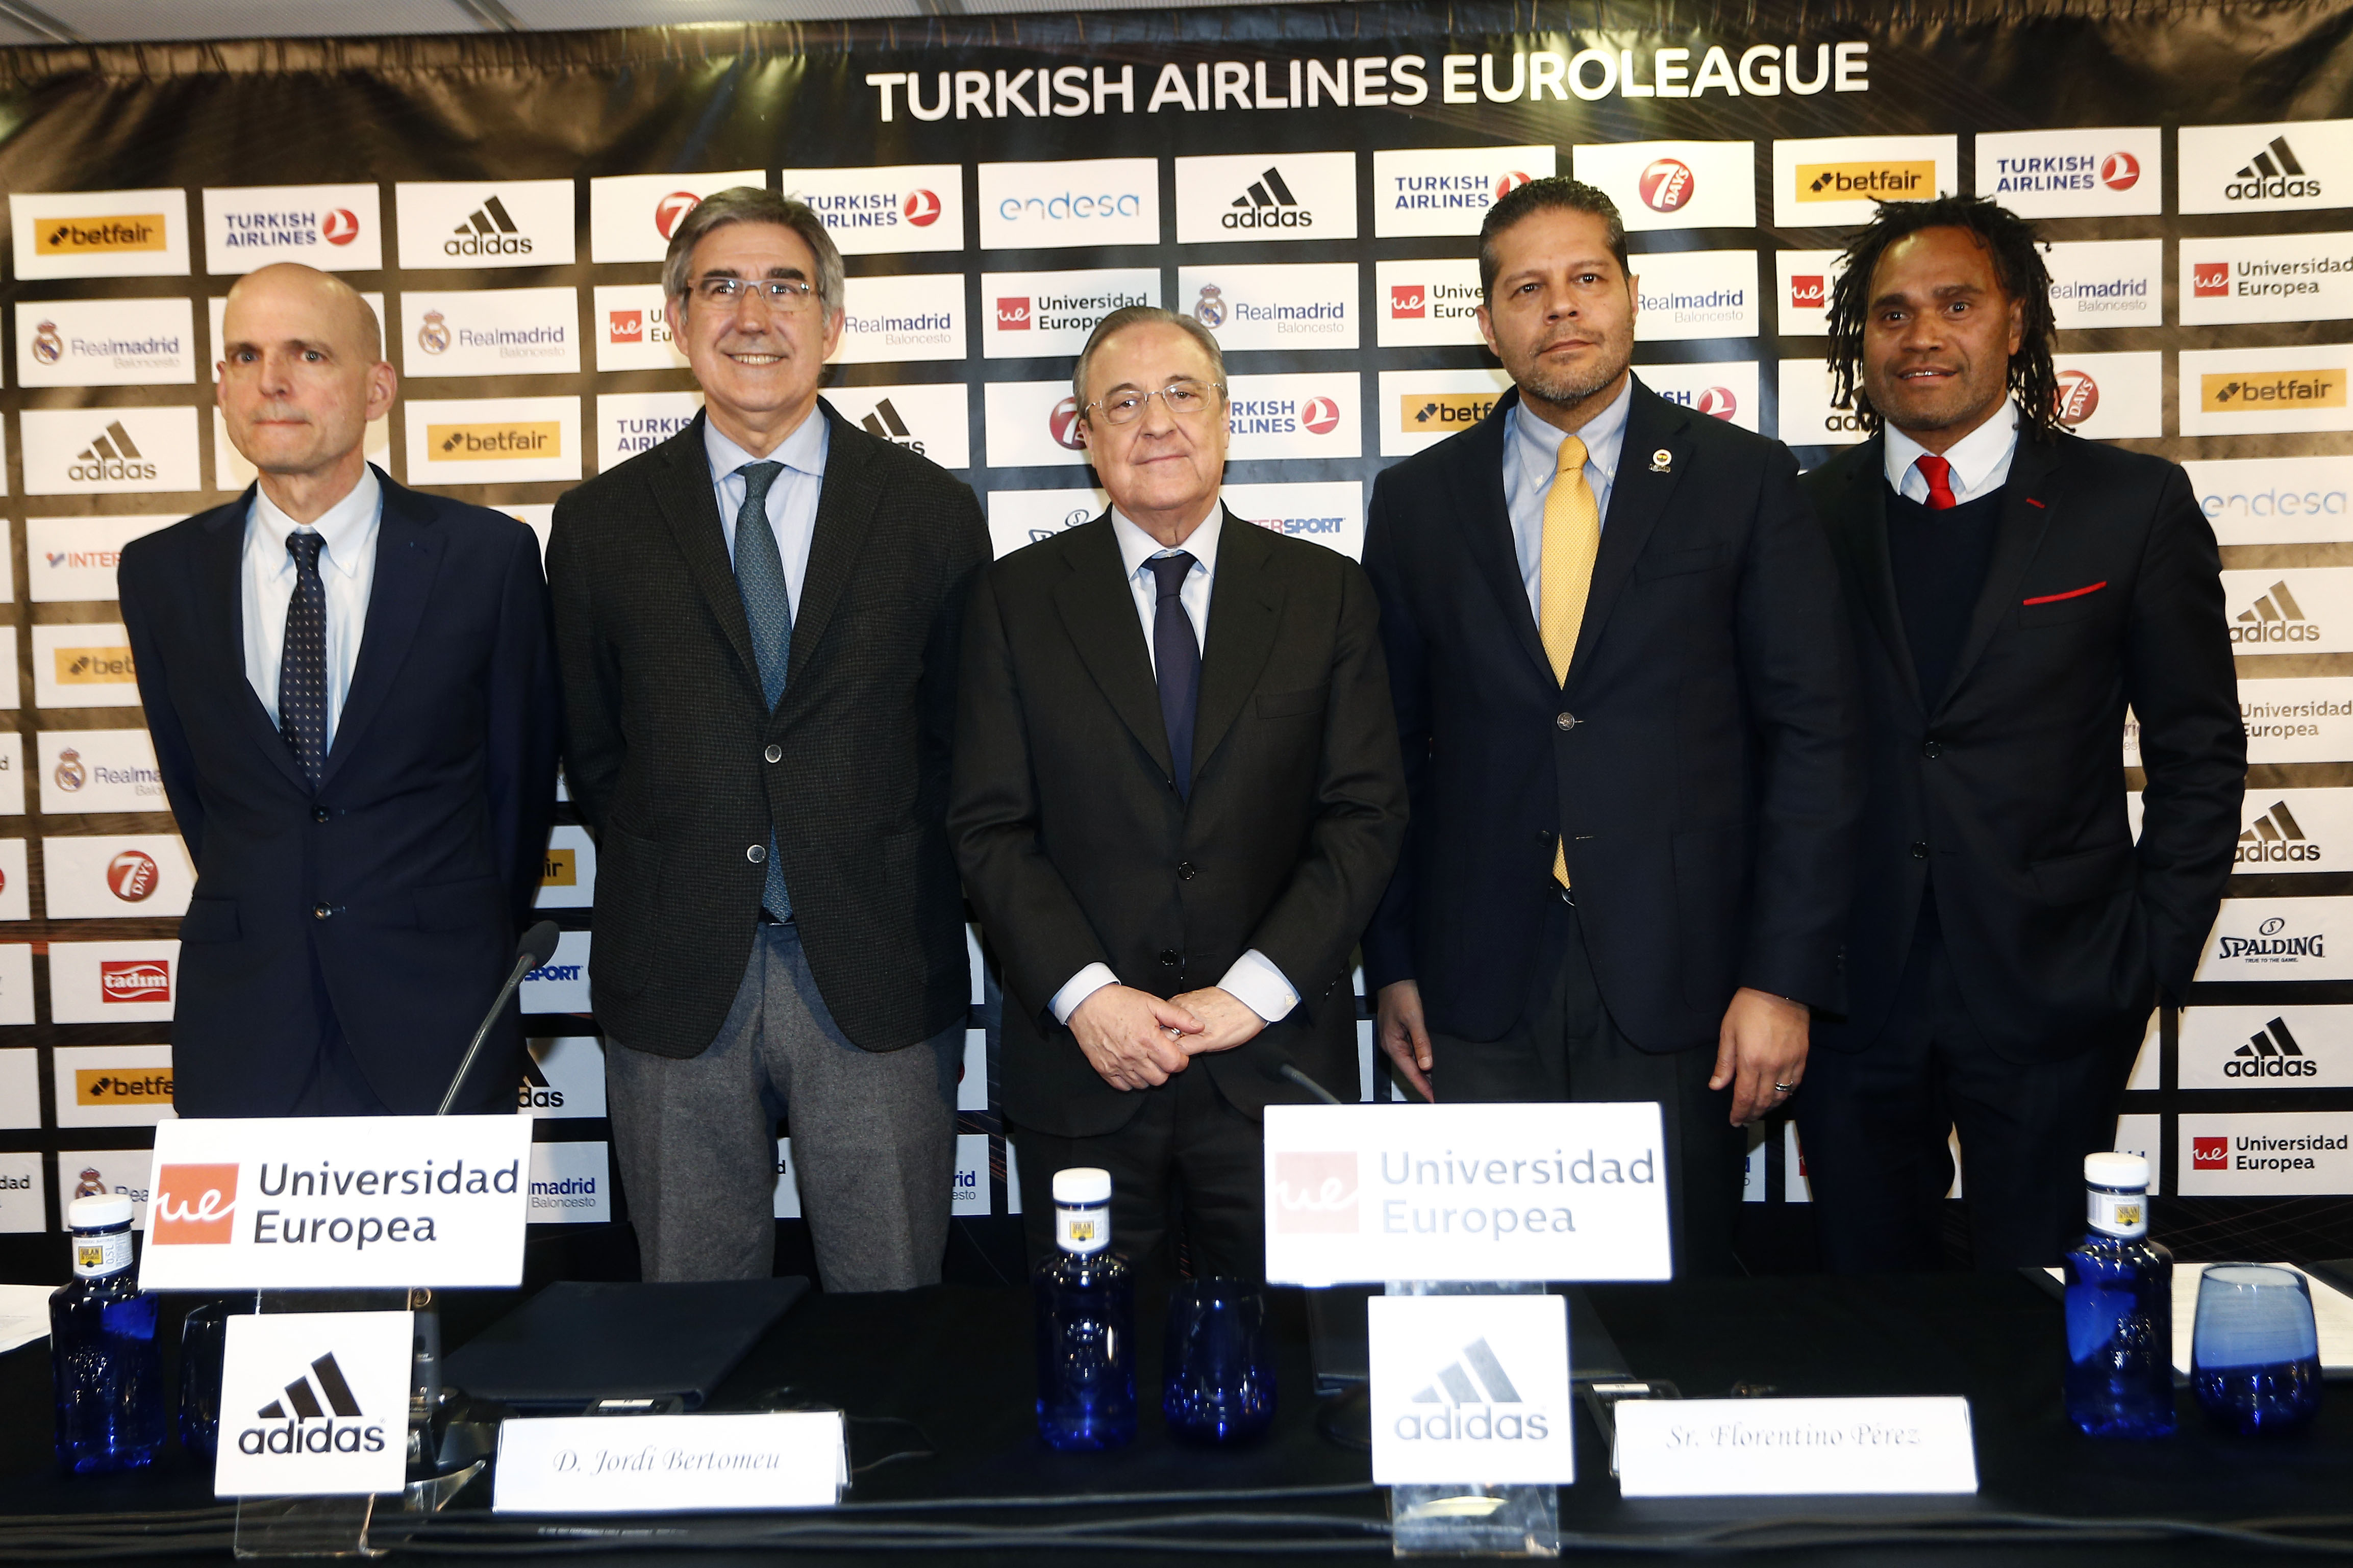 Real Madrid and Euroleague in favor of the Athens Principle!